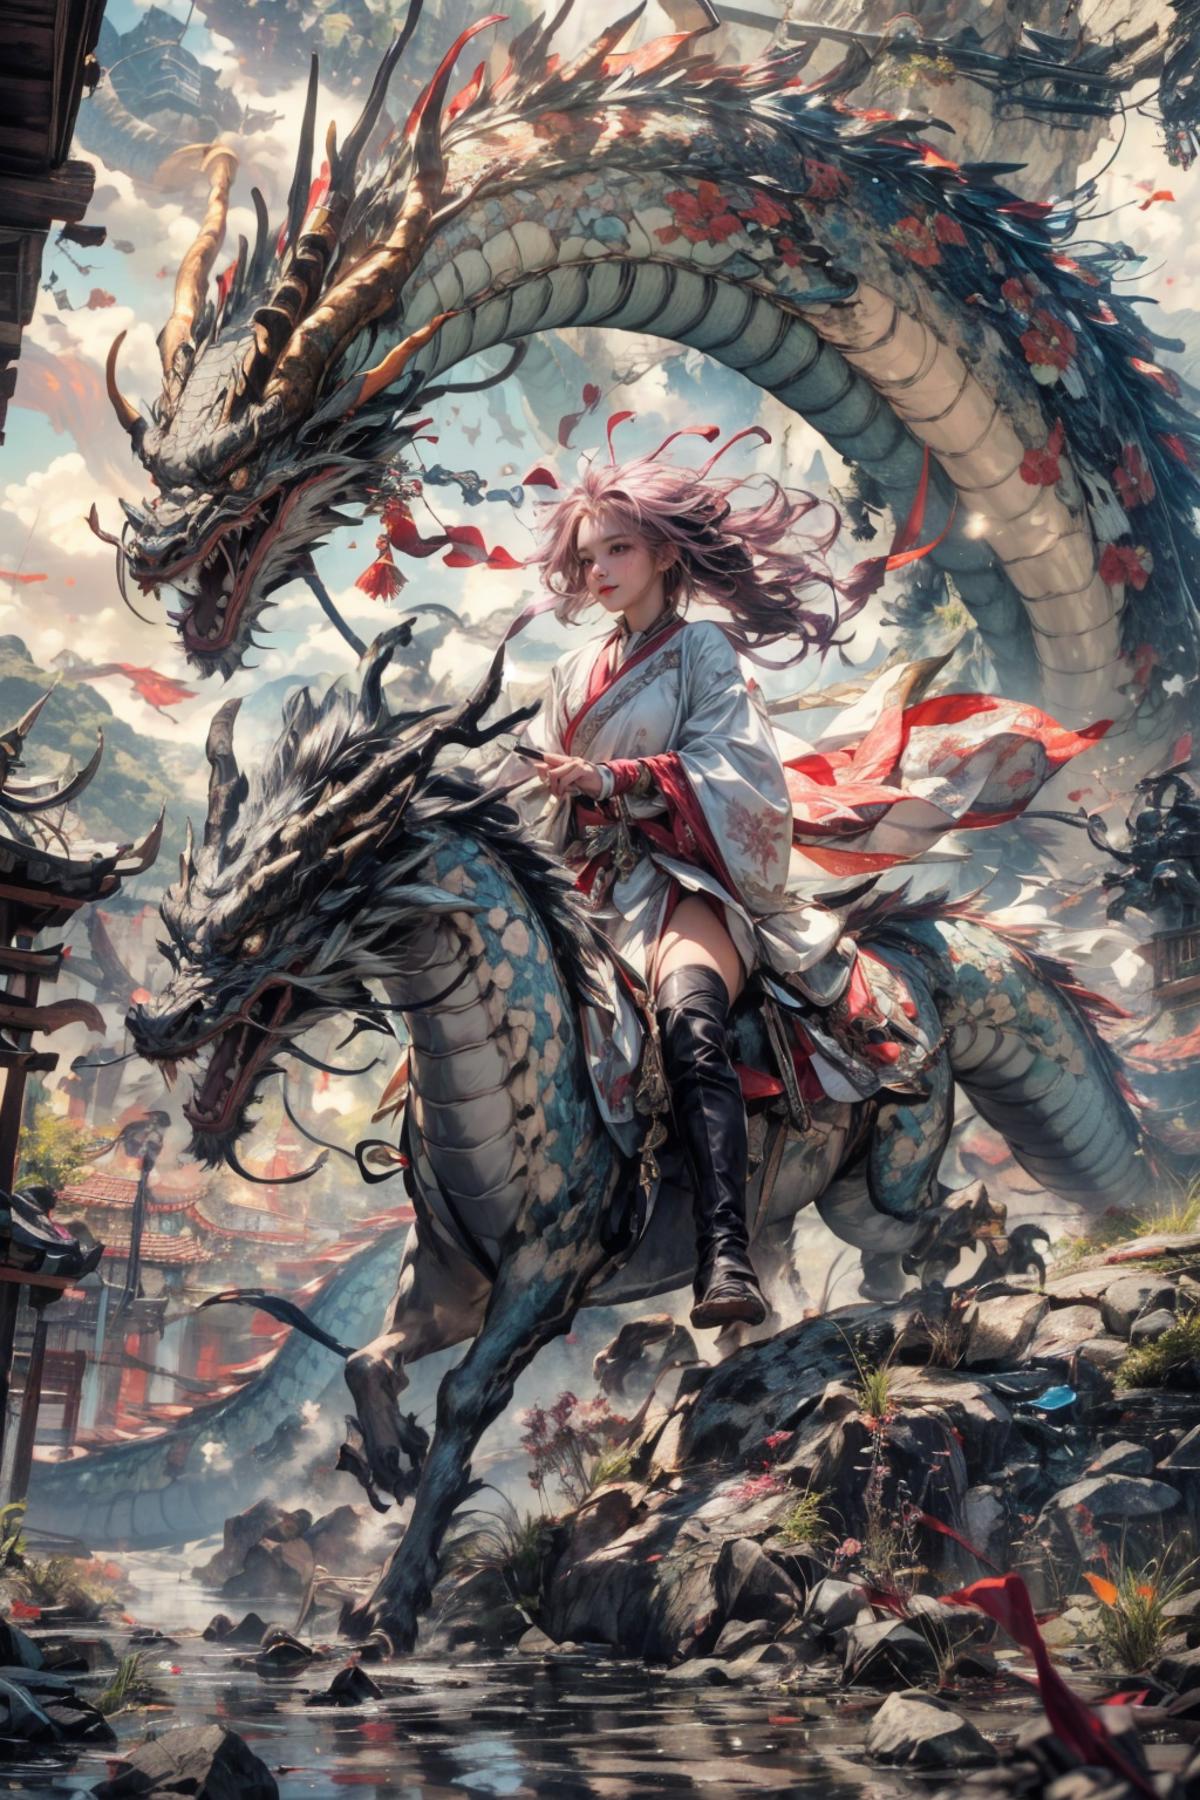 [LoRa] Riding Monster/怪獣騎士 Concept image by yoyochen2023